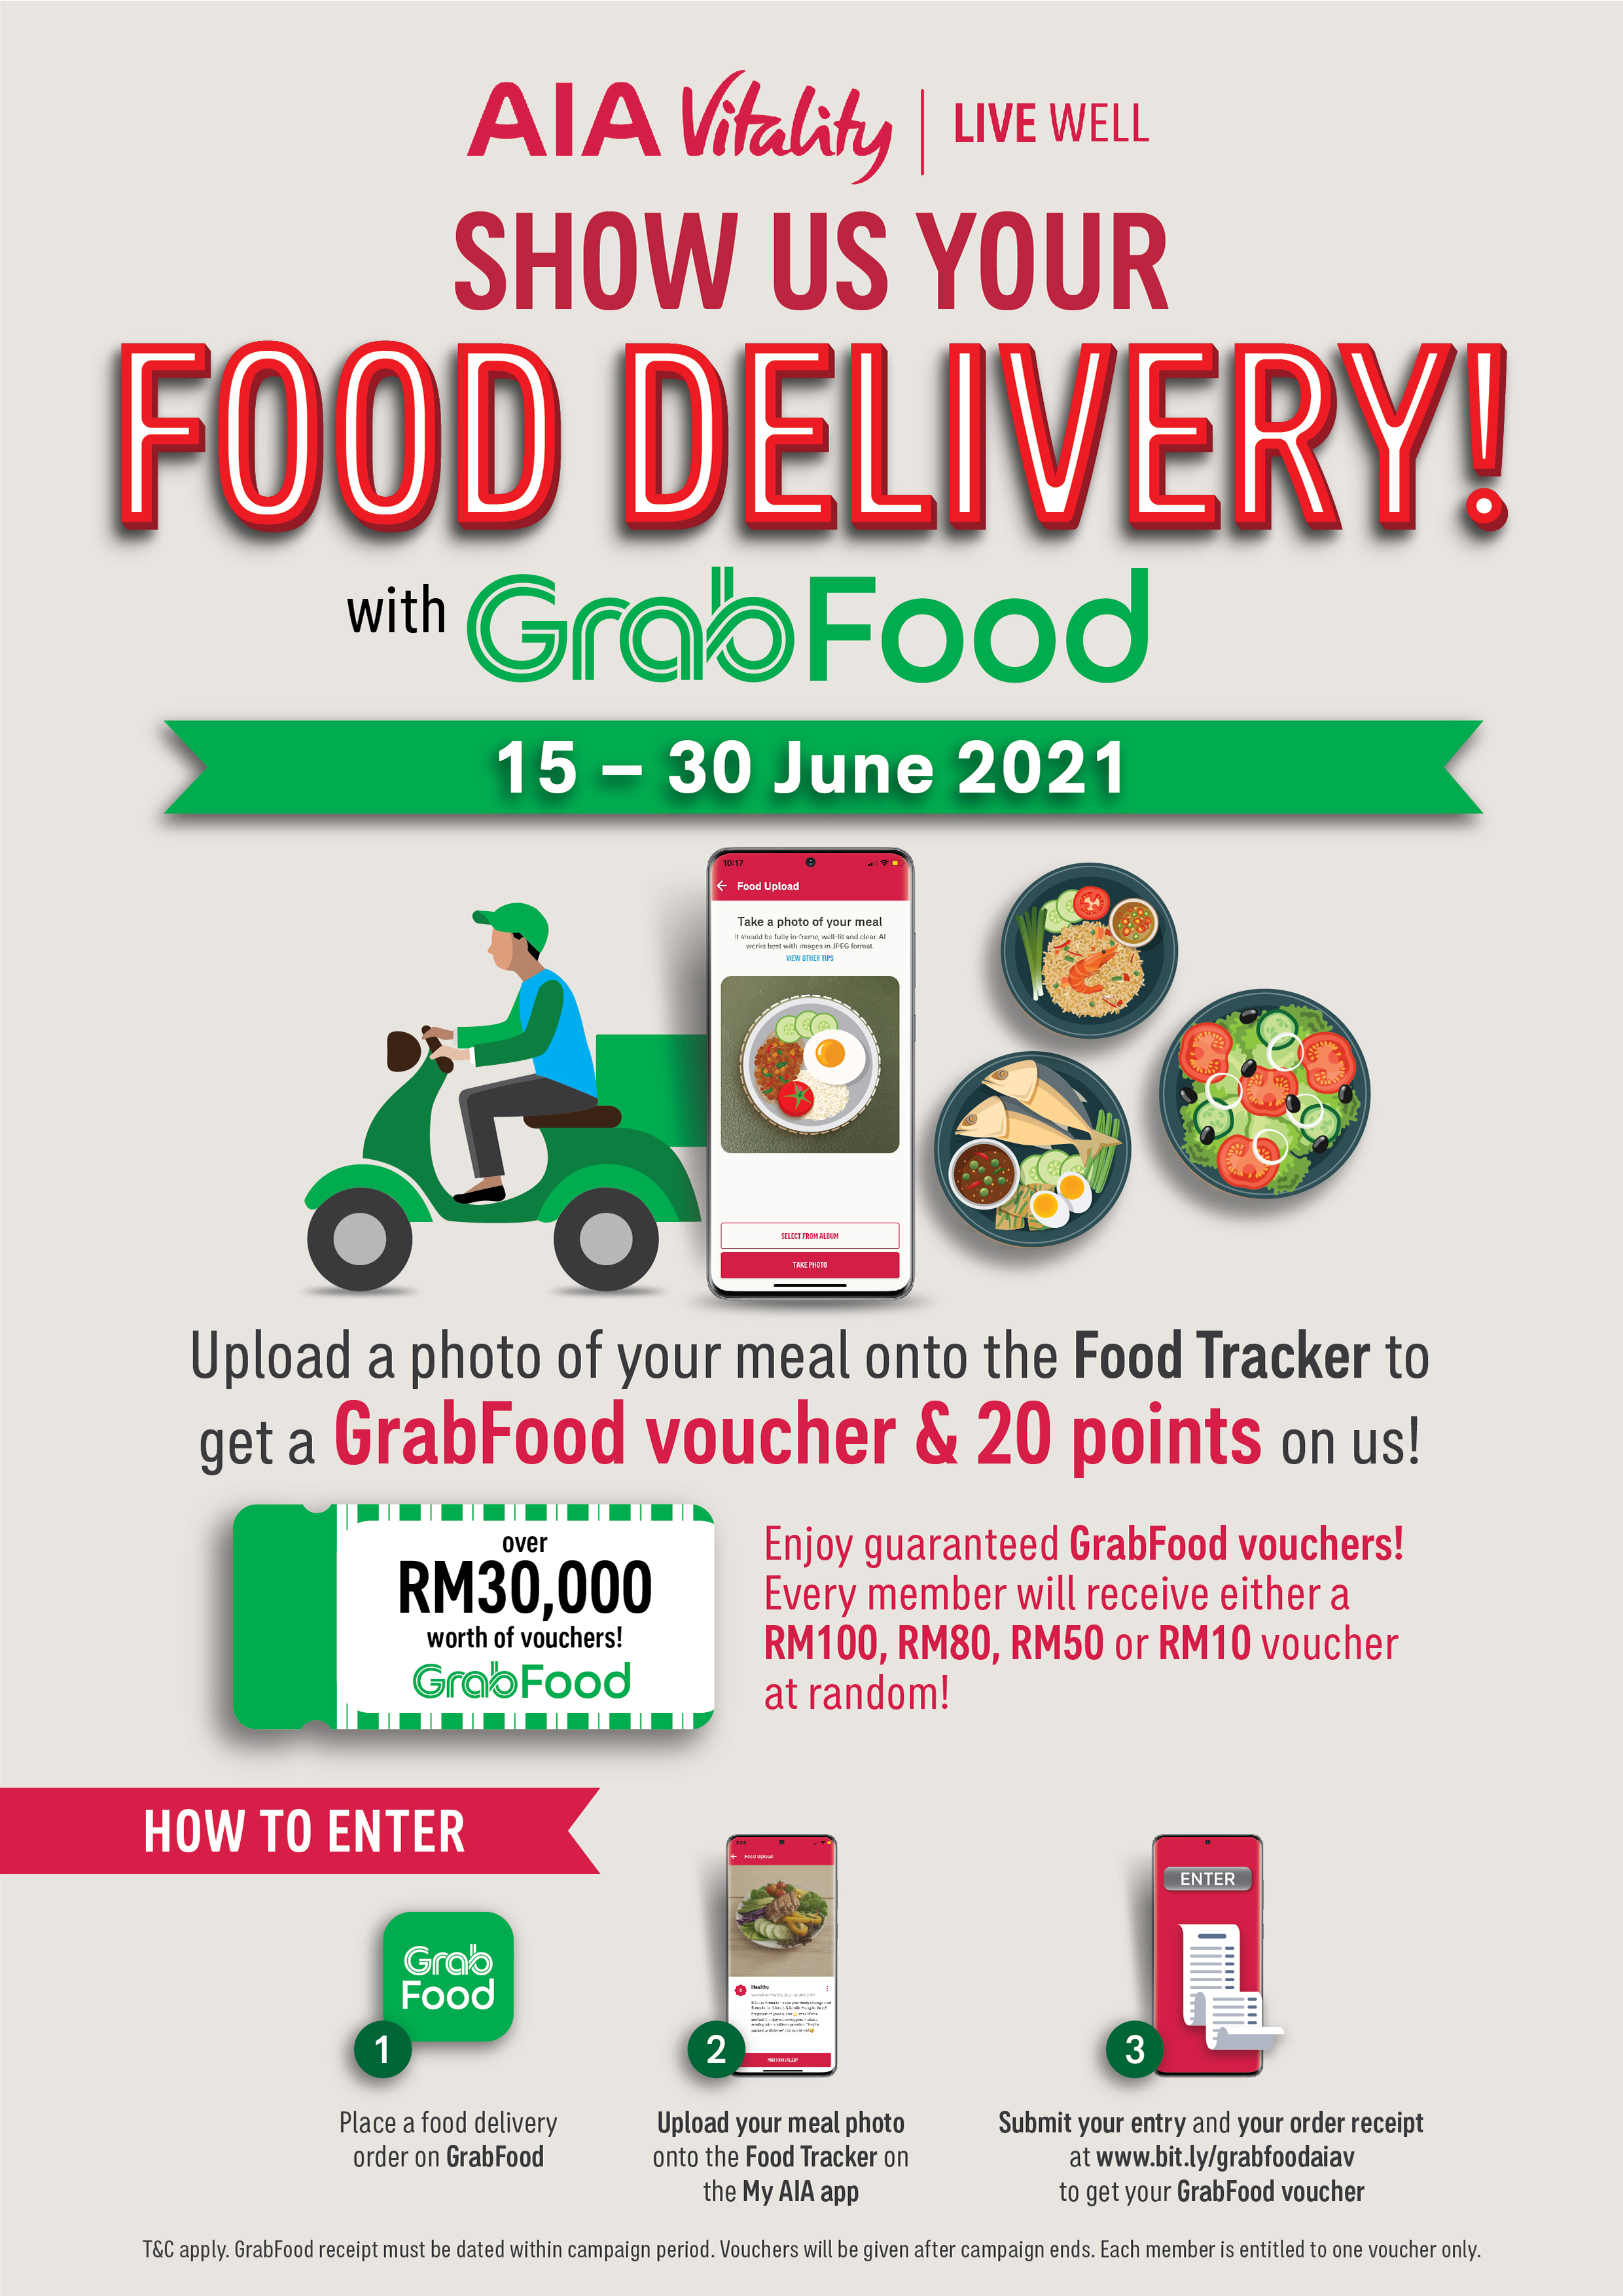 “SHOW US YOUR FOOD DELIVERY” CAMPAIGN